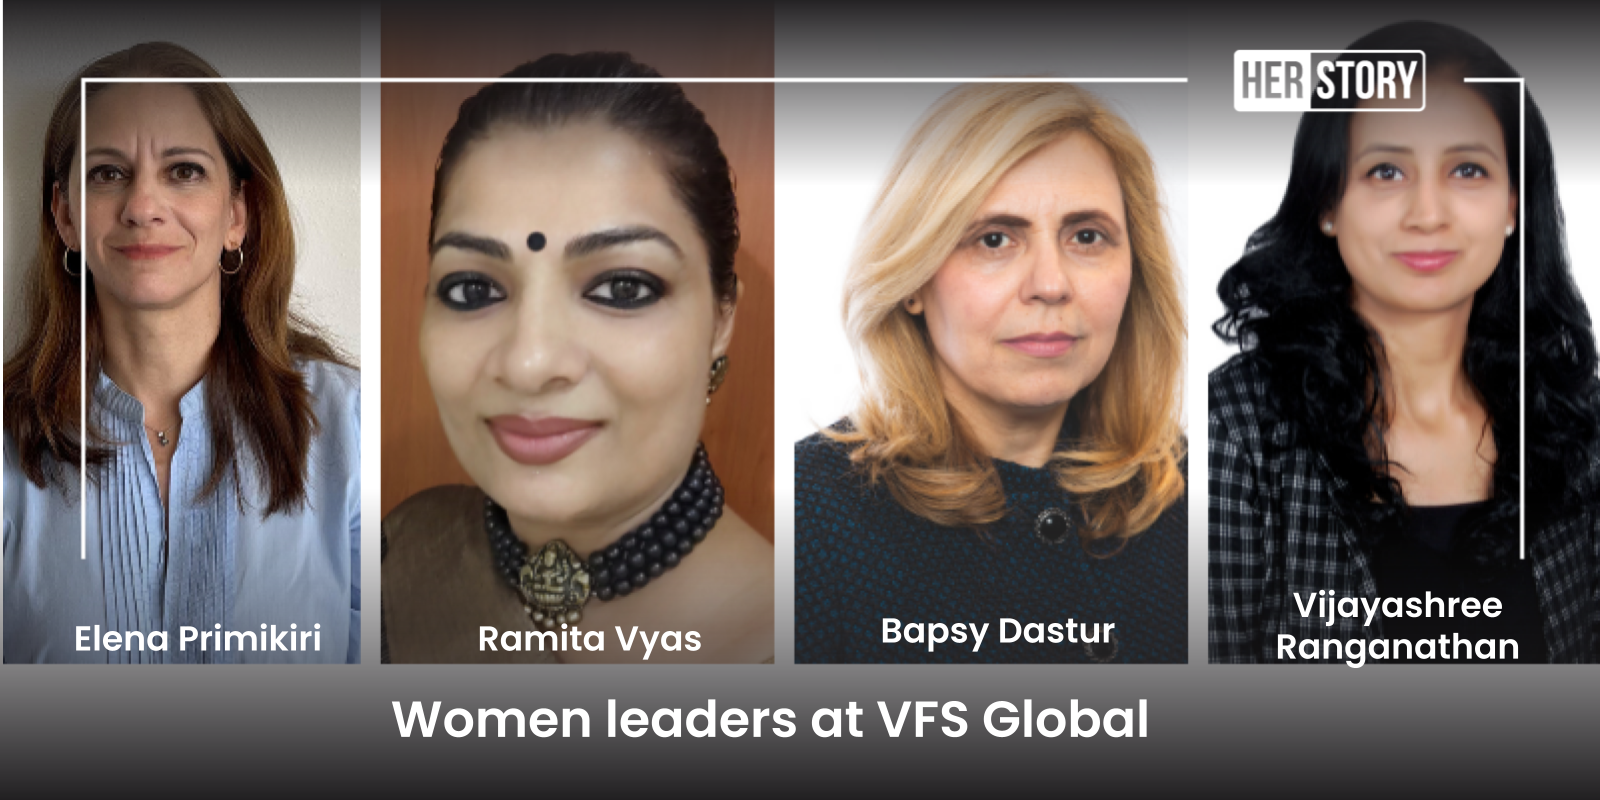 With 58 pc women across operations in 140+ countries, how VFS Global is promoting gender equality at the workplace

